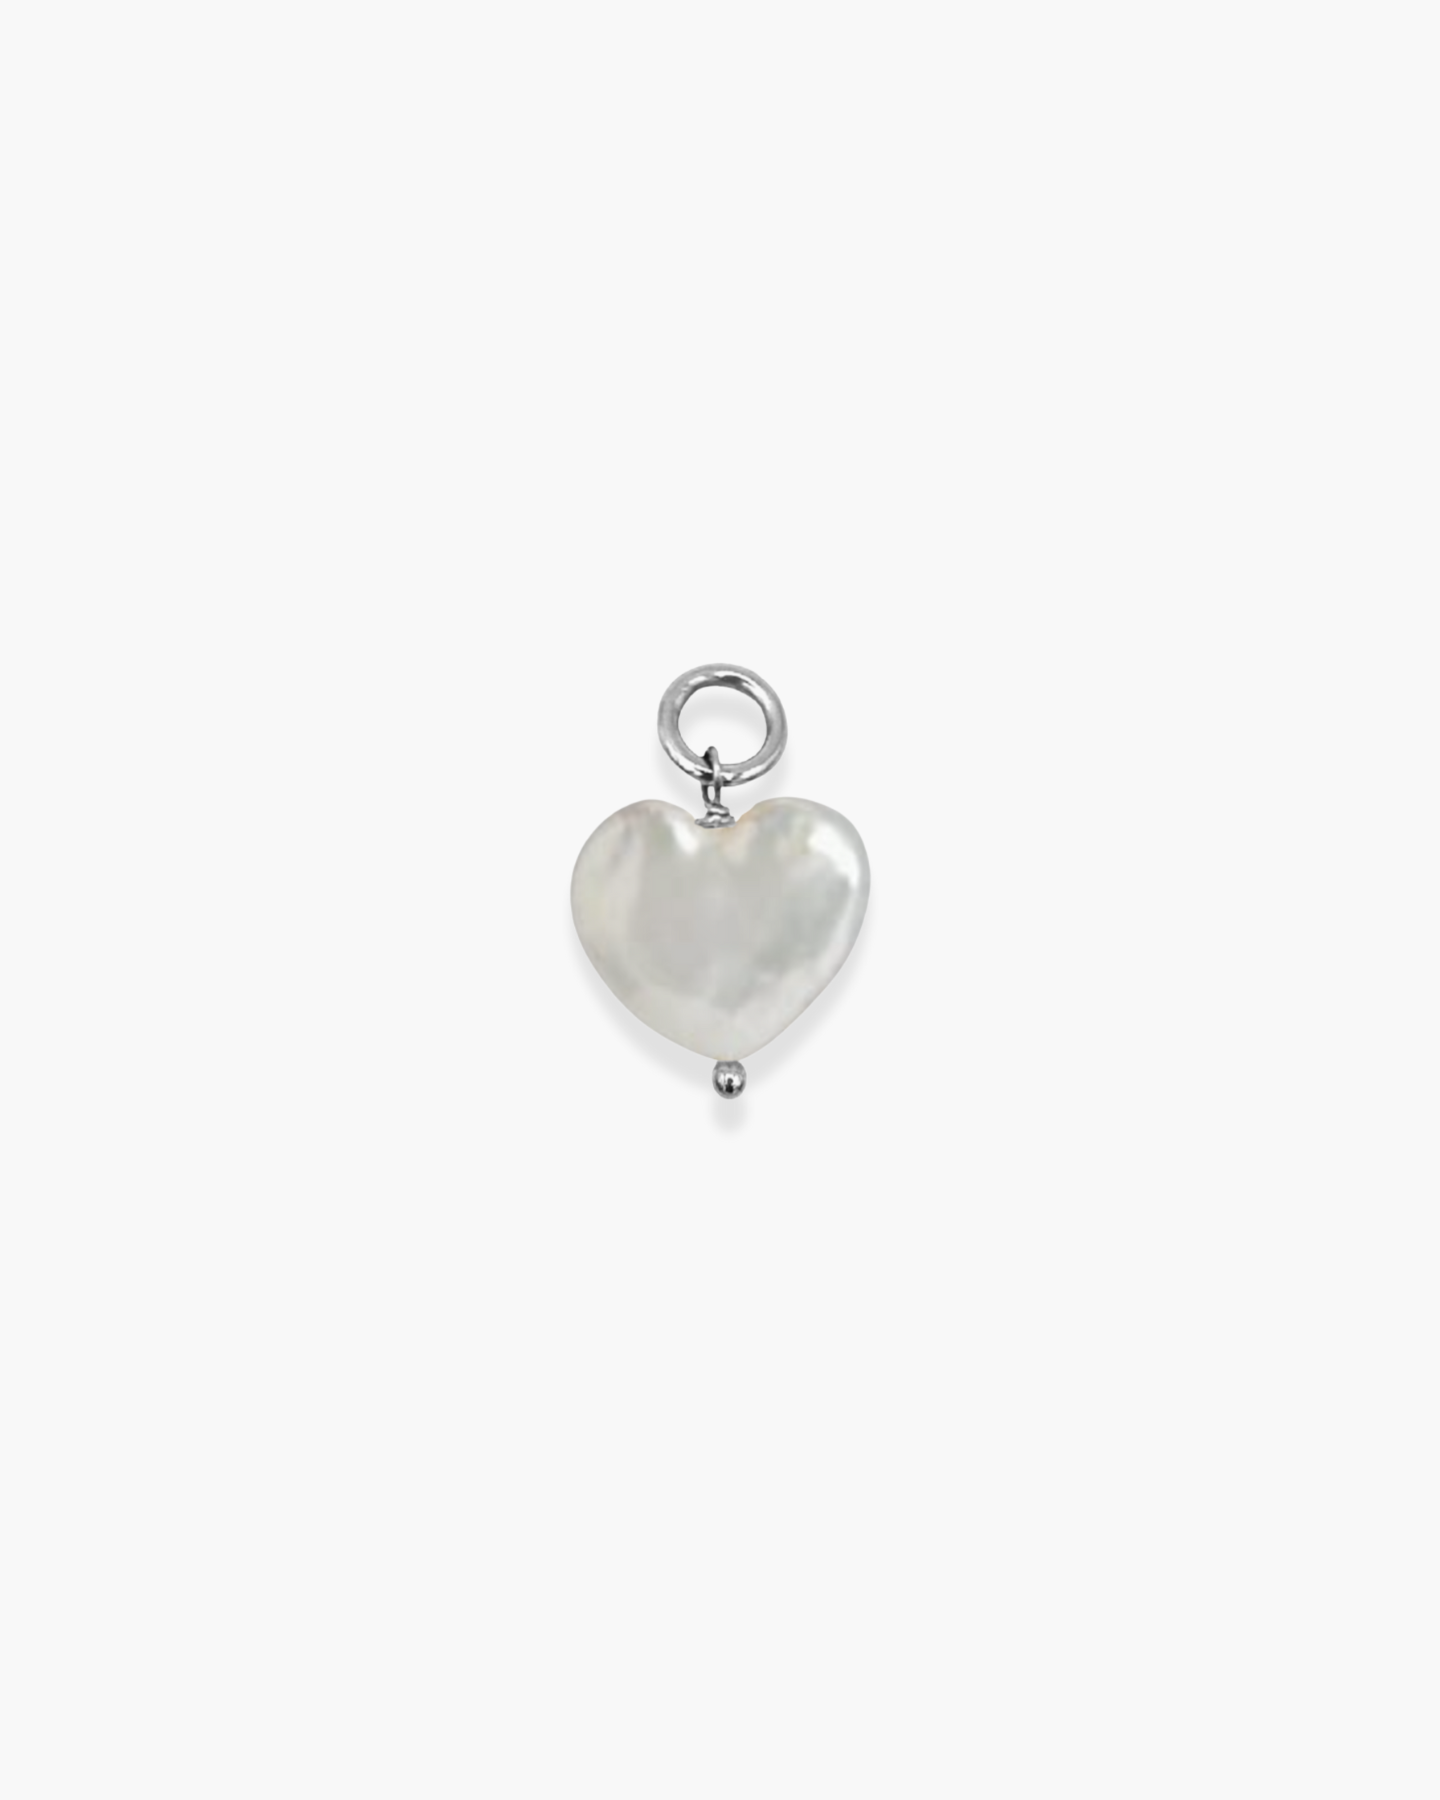 Lovey Dovey Pearl Charm Silver